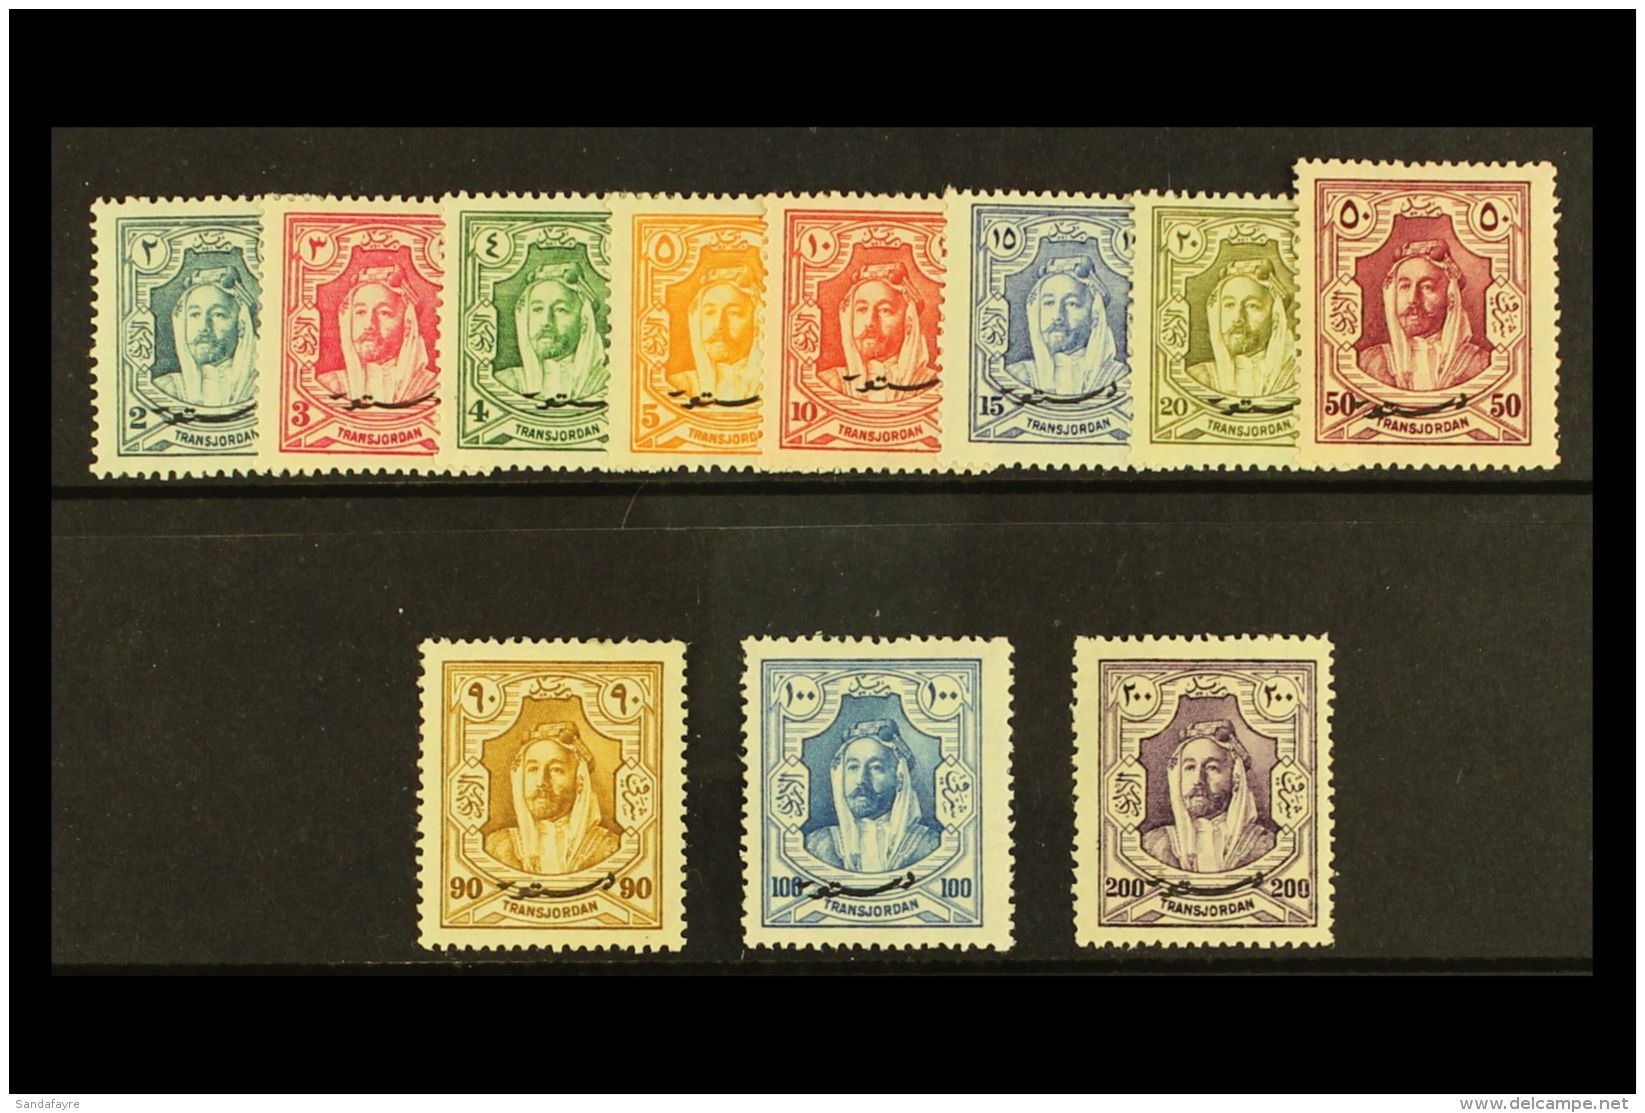 1928 New Constitution Set Complete SG 172/182, Very Fine And Fresh Mint. (11 Stamps) For More Images, Please Visit... - Jordania